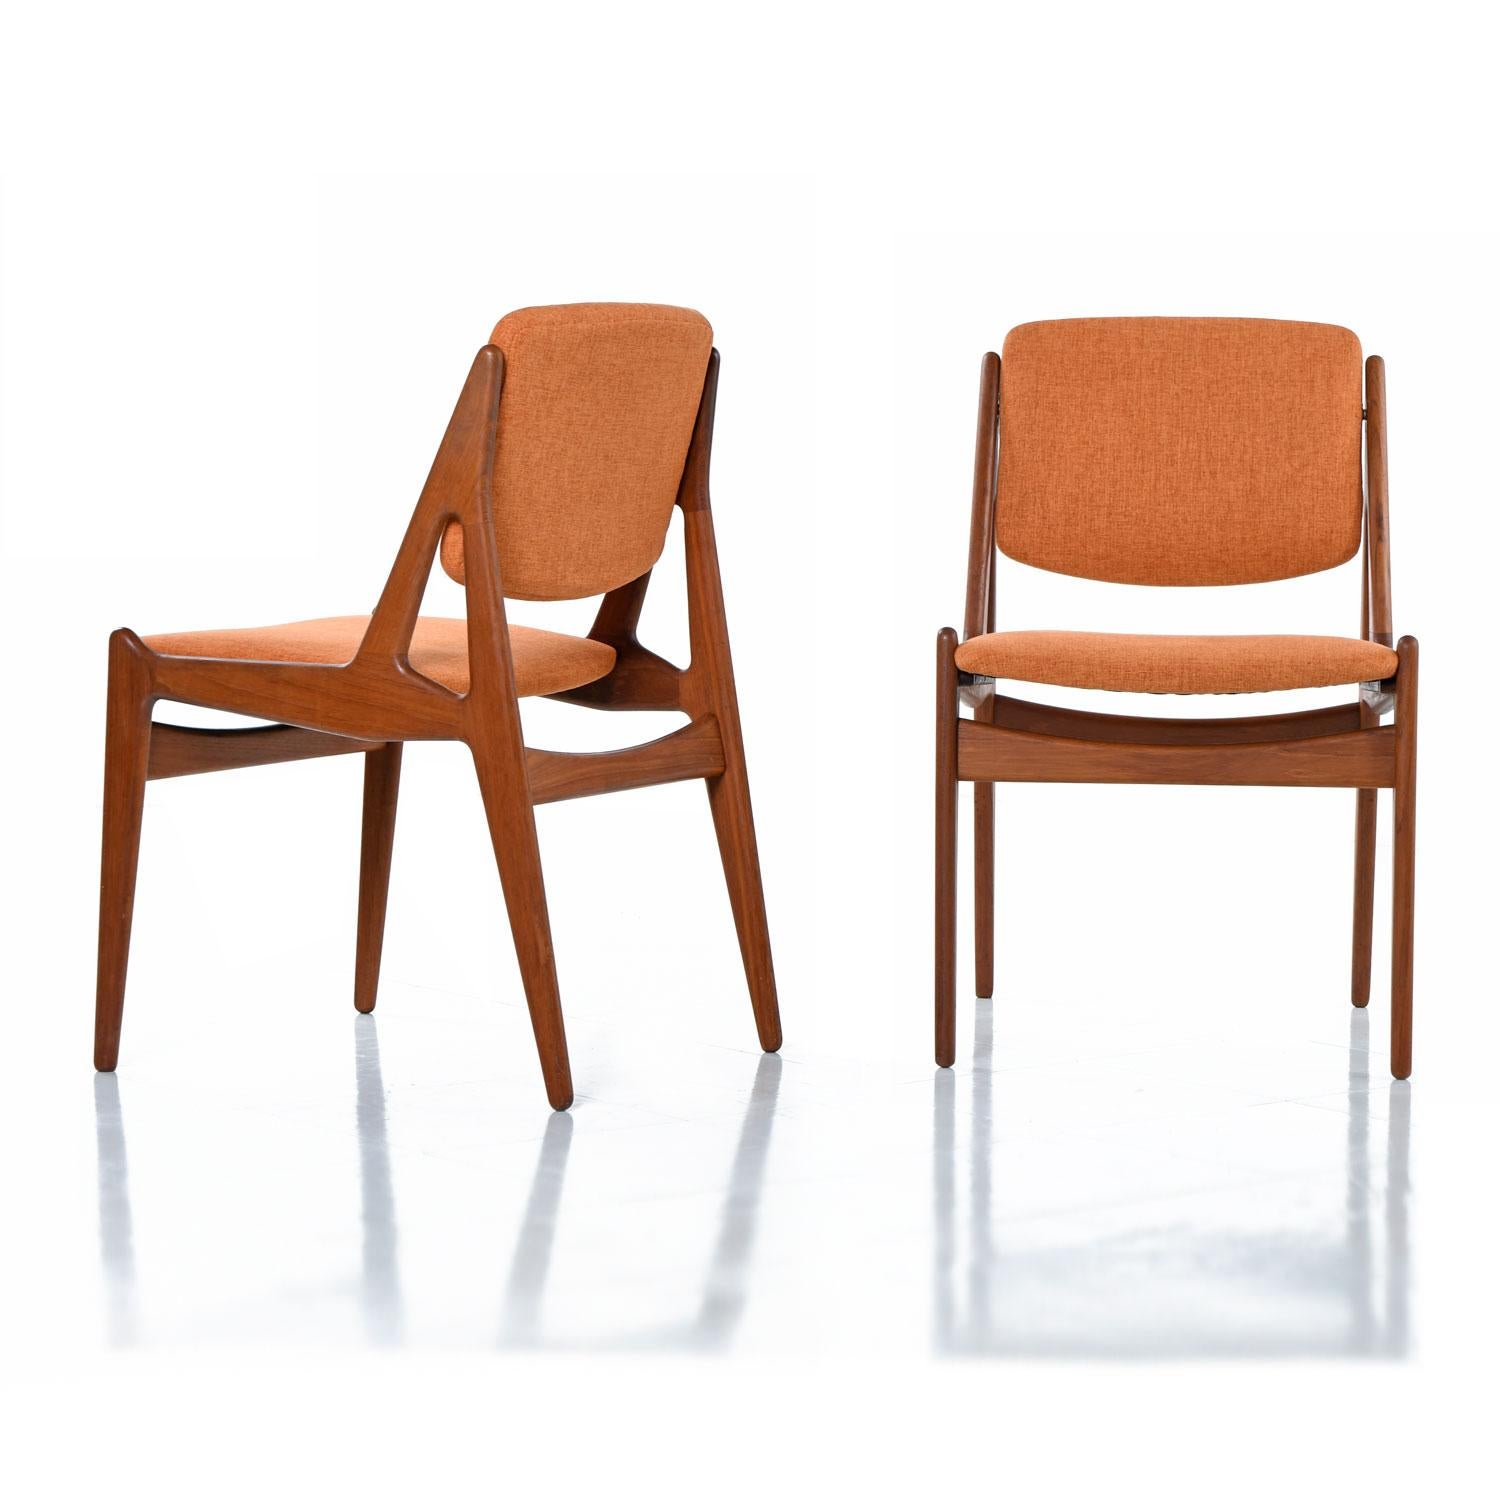 Set of six Mid-Century Modern Danish solid teak dining chairs designed by Arne Vodder for Vamo Sonderborg. The chairs have been restored with all new high quality, burnt orange woven tweed upholstery matching original factory spec. The fabric is age